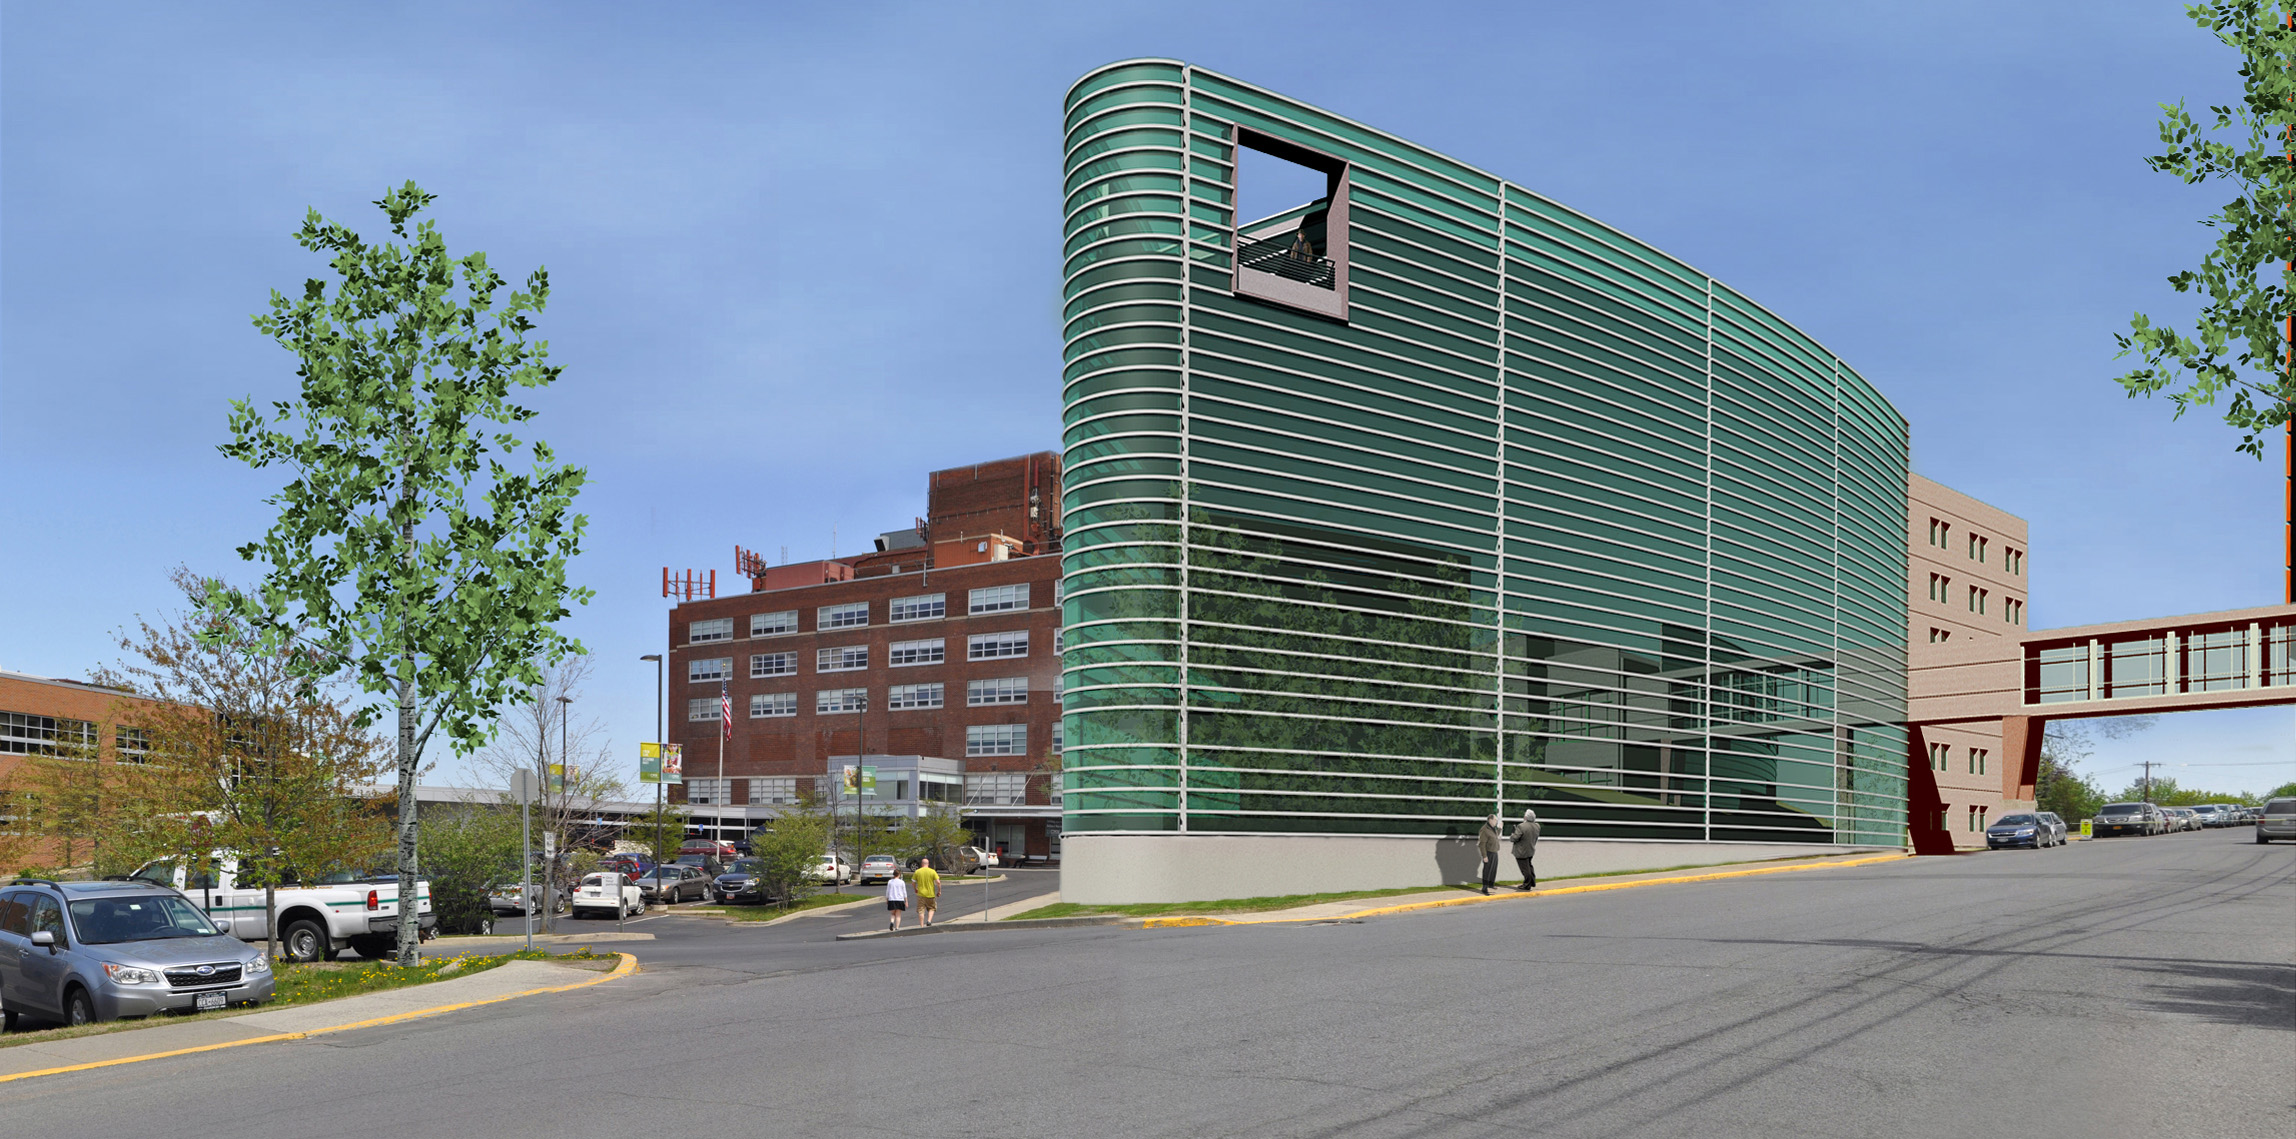 The Hospital Tower connects to all six floors of the existing hospital tower and has new patient rooms.  The tower fronts the street and creates a new entry for the hospital and also has a bridge that connects to the medical office building across the street.   